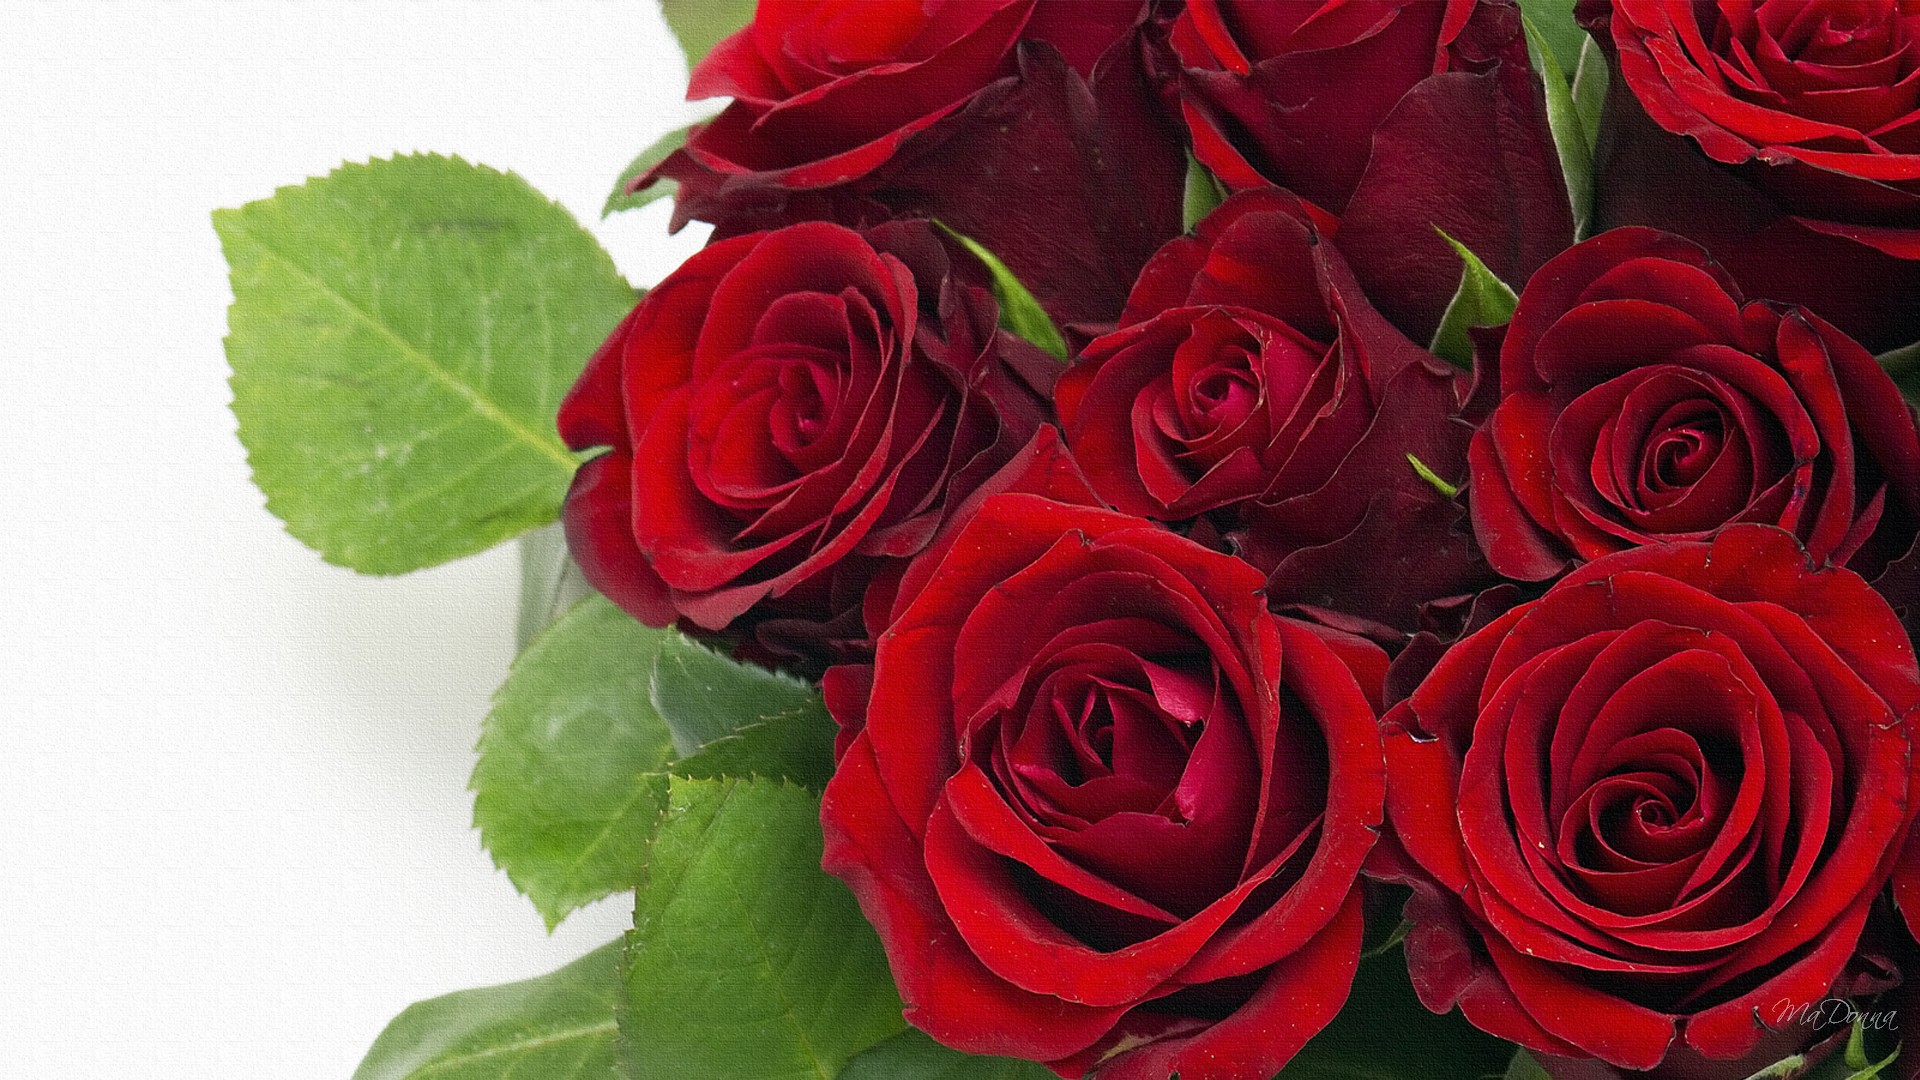 most beautiful red rose flowers in the world